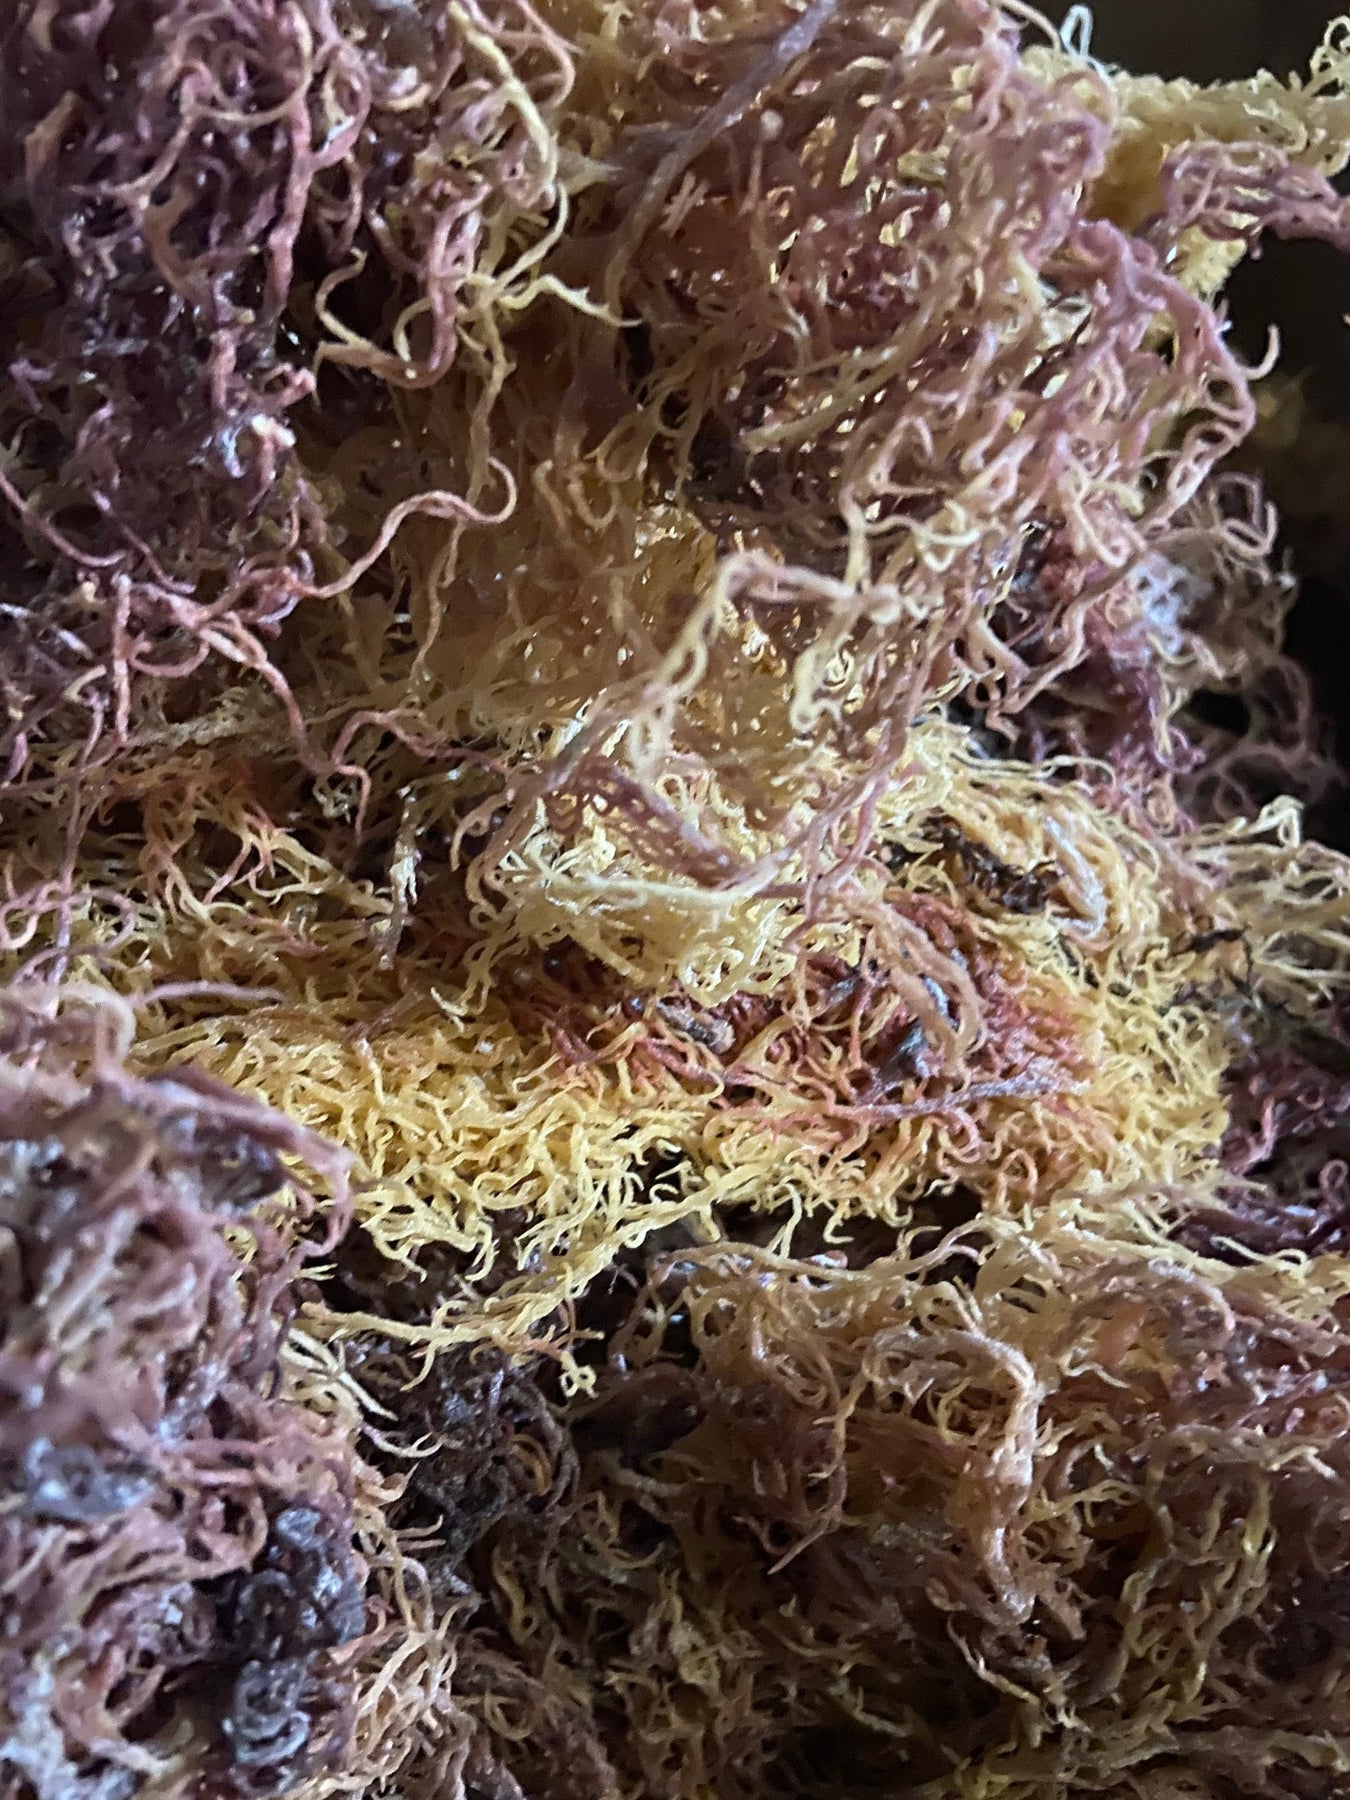 BULK WHOLESALE FULL SPECTRUM Raw Natural Sea Moss from St. Lucia.  Wildcrafted Superfood! – Saint Luscious